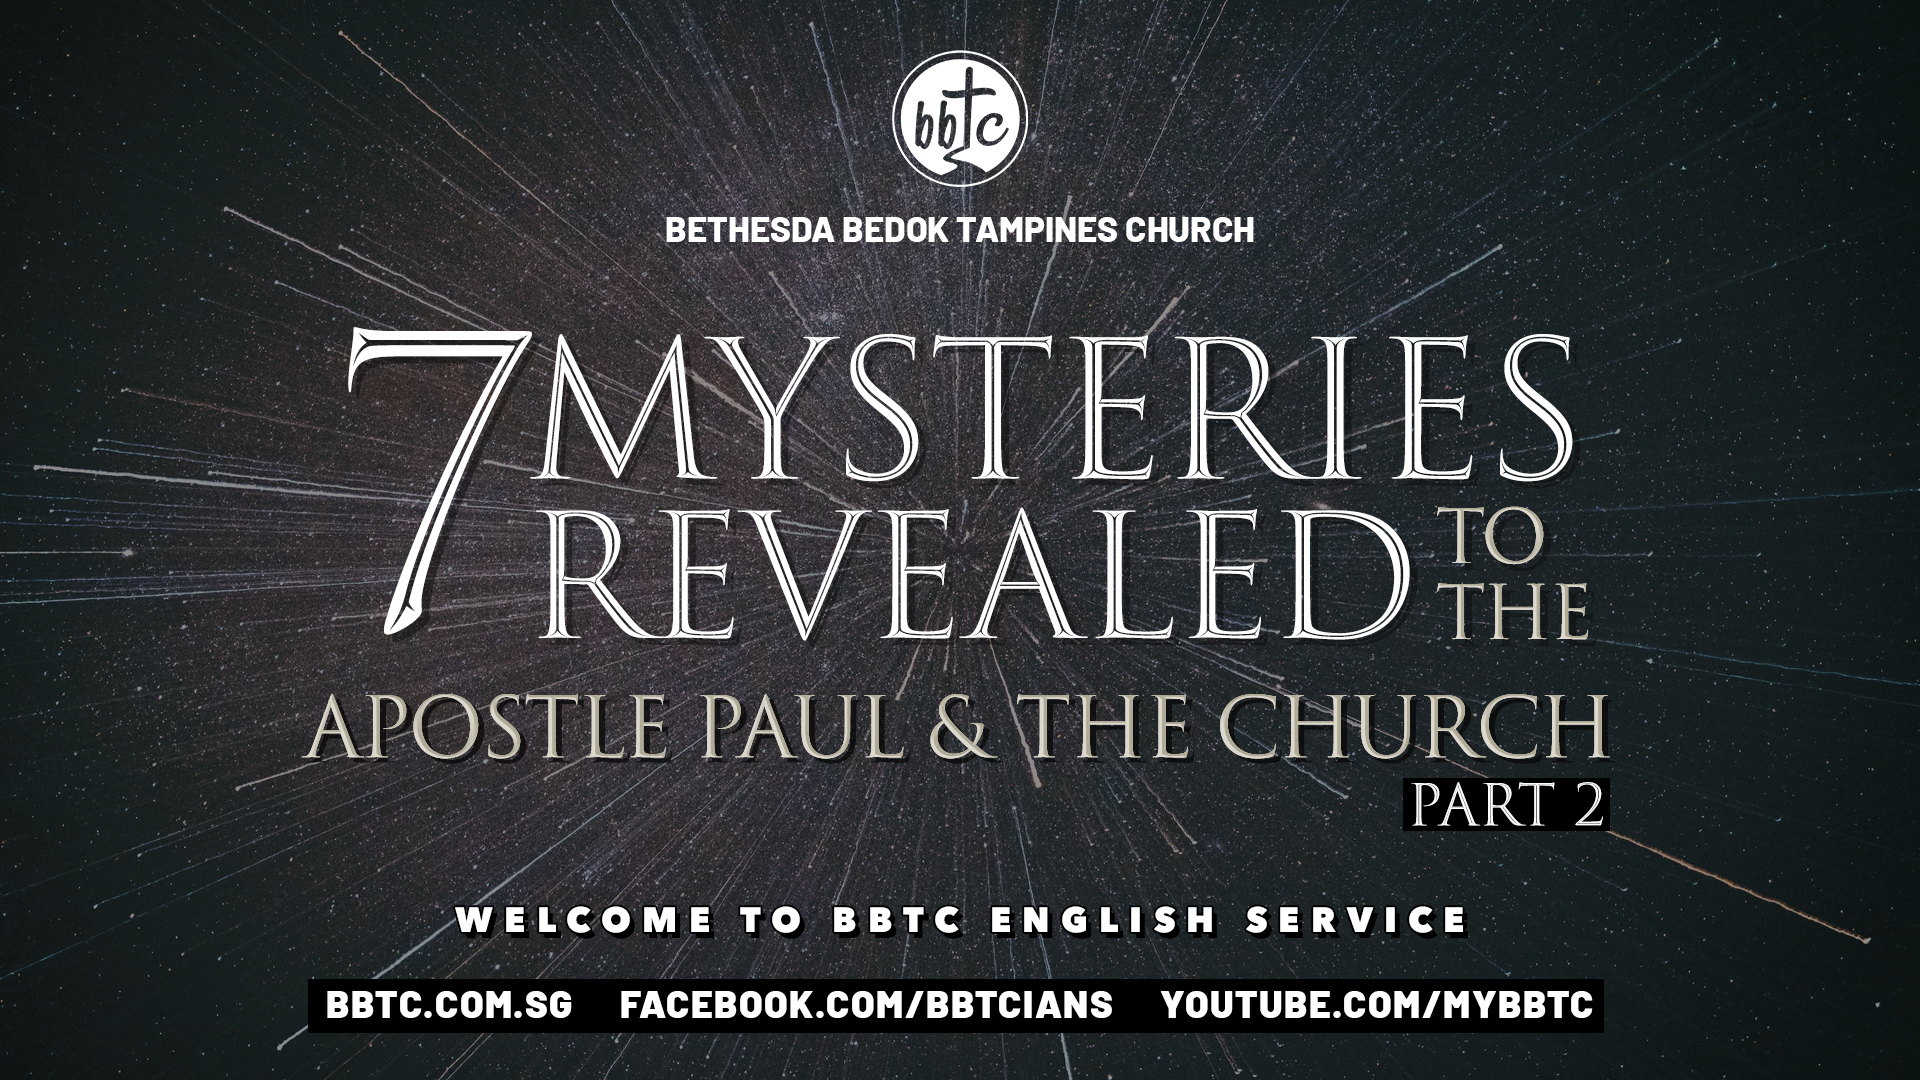 7 MYSTERIES REVEALED TO THE APOSTLE PAUL AND THE CHURCH (PART 2)